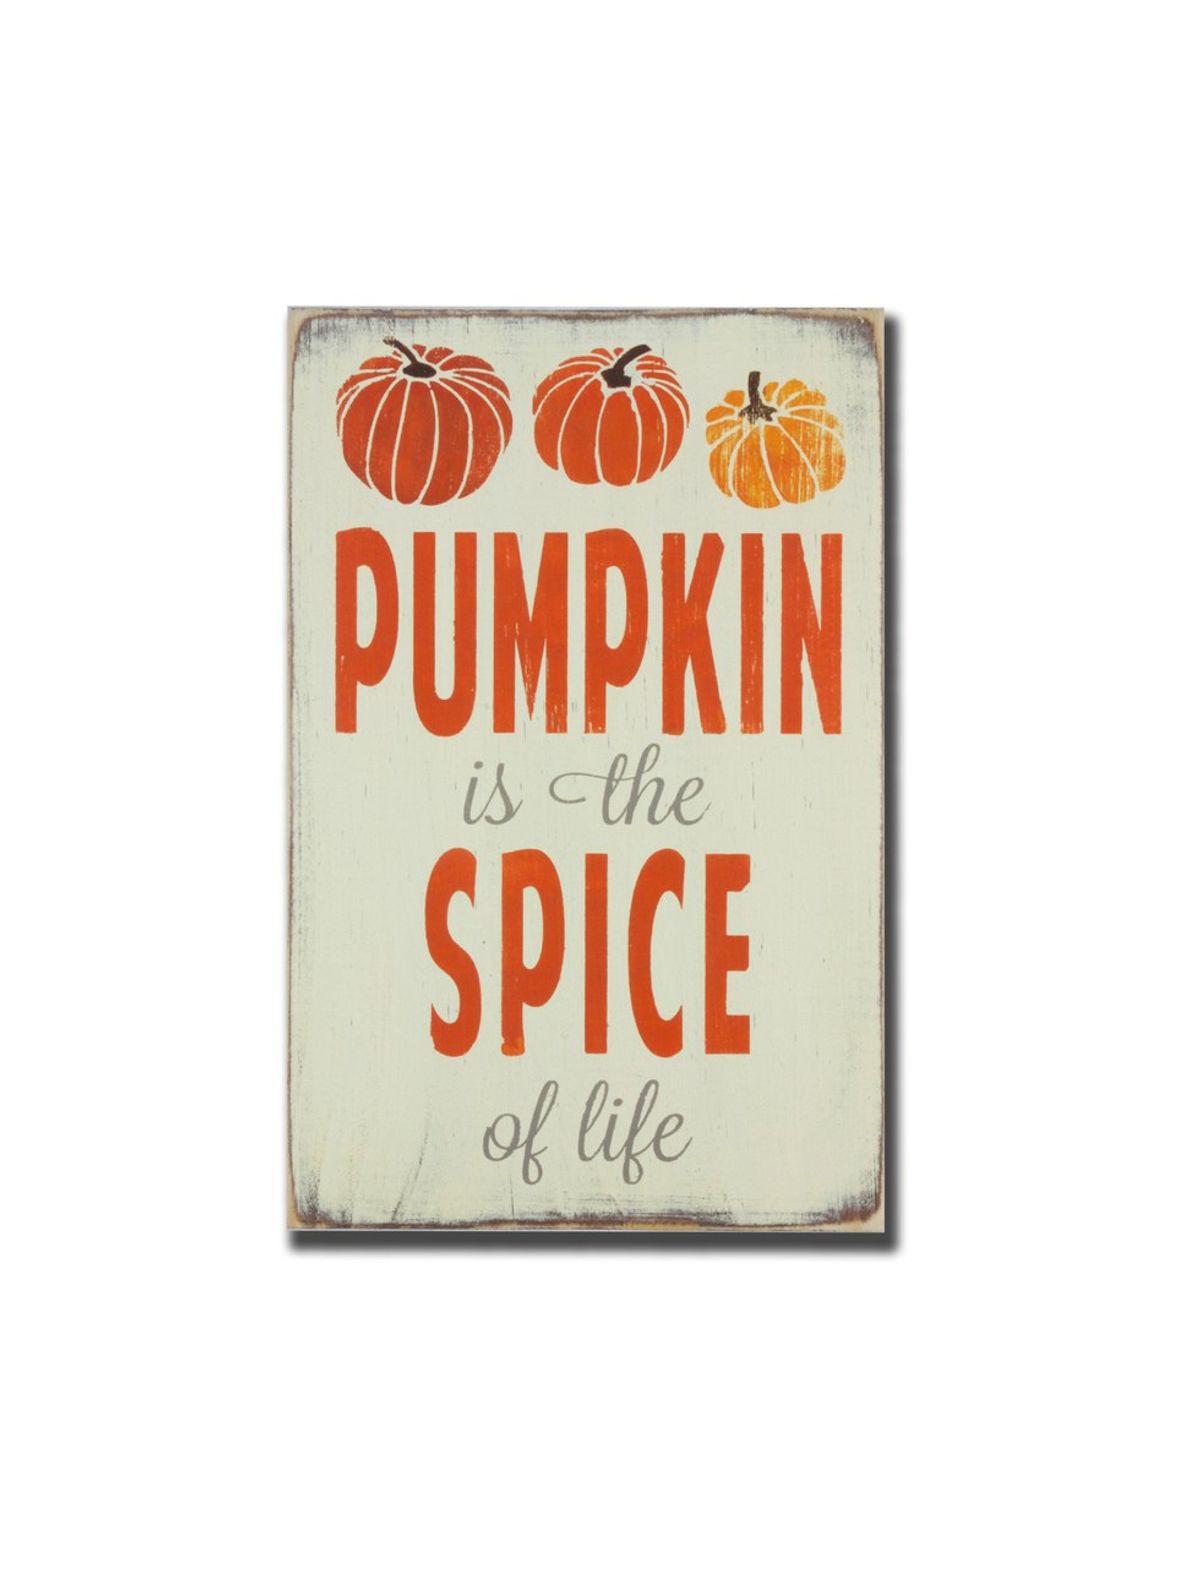 17 Pumpkin Flavored Products You Need in Your Life Right Now